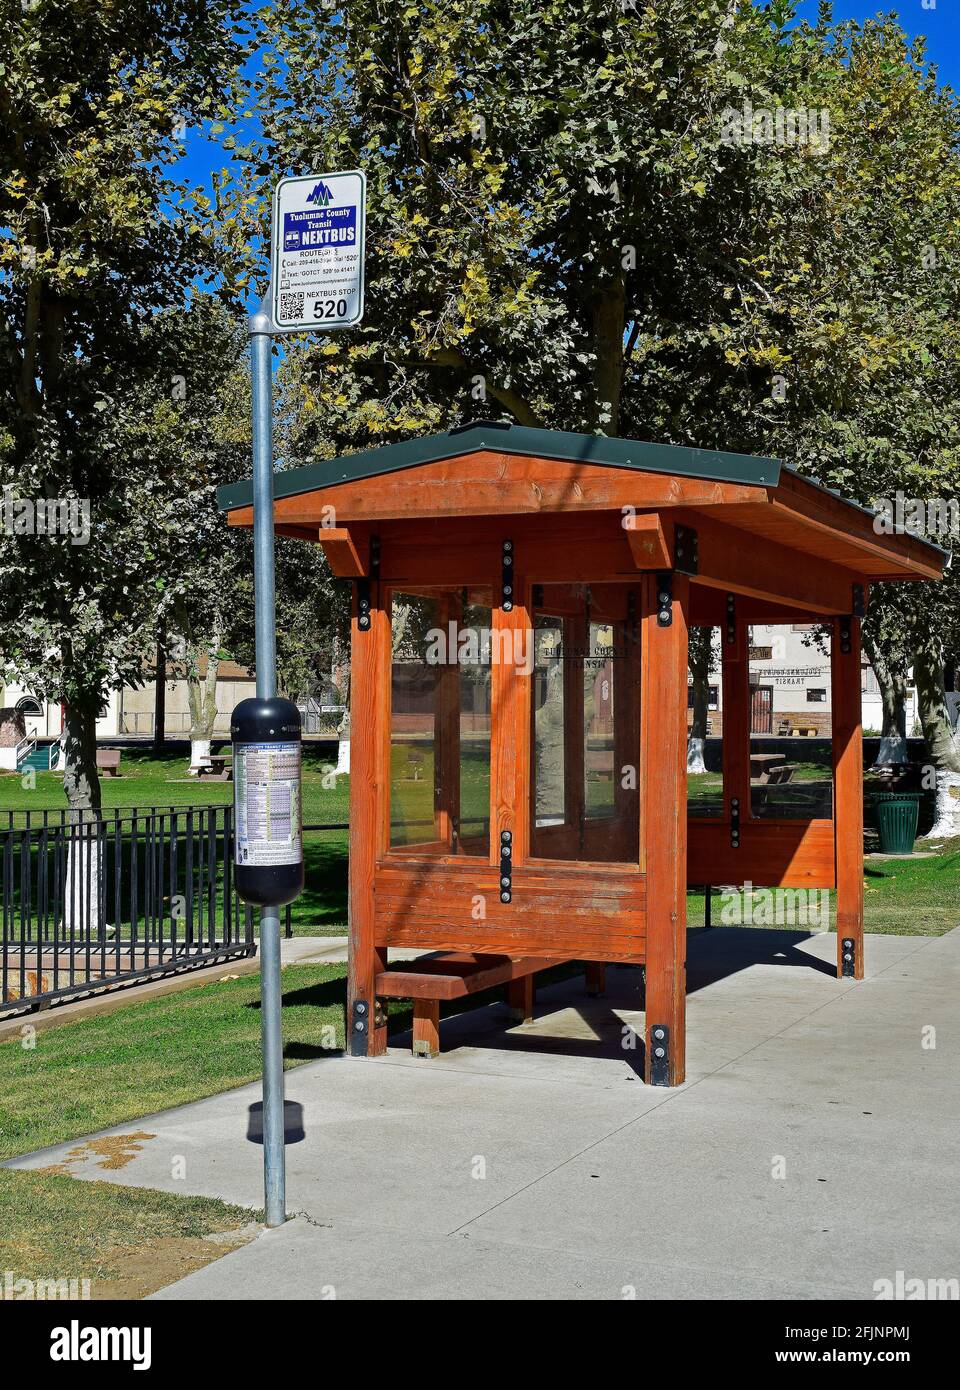 Country Bus Shelter High Resolution Stock Photography and Images - Alamy